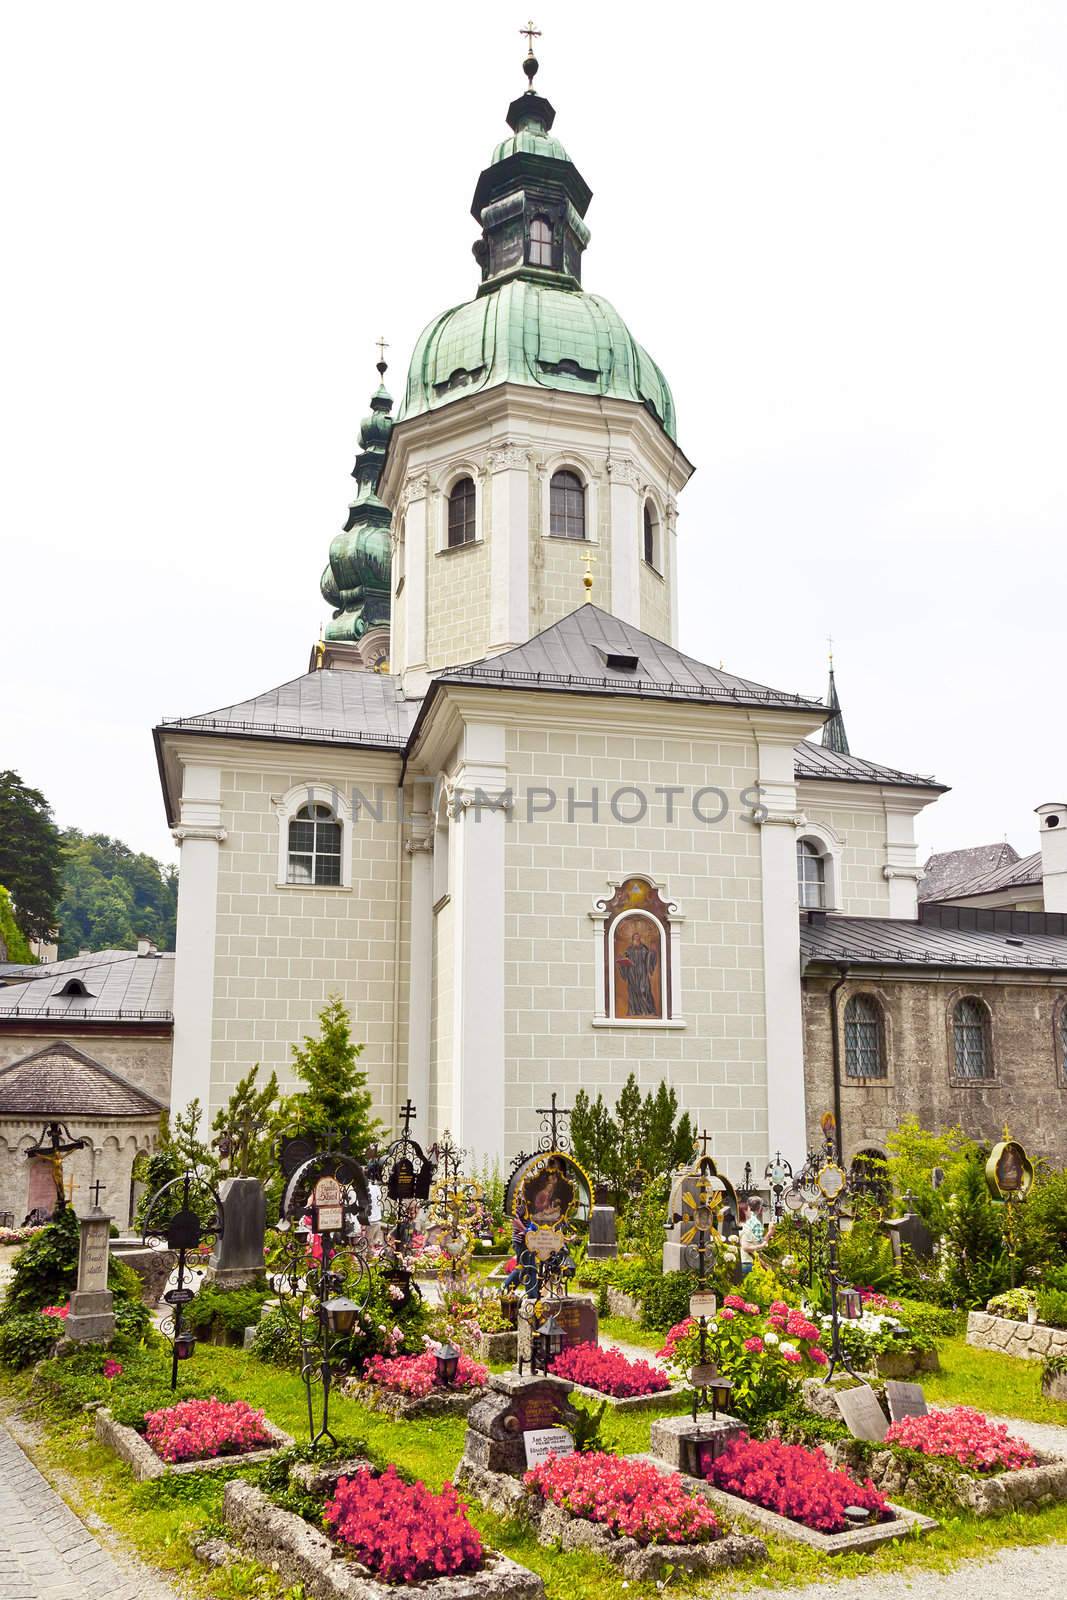 An image of the nice cemetery in Salzburg